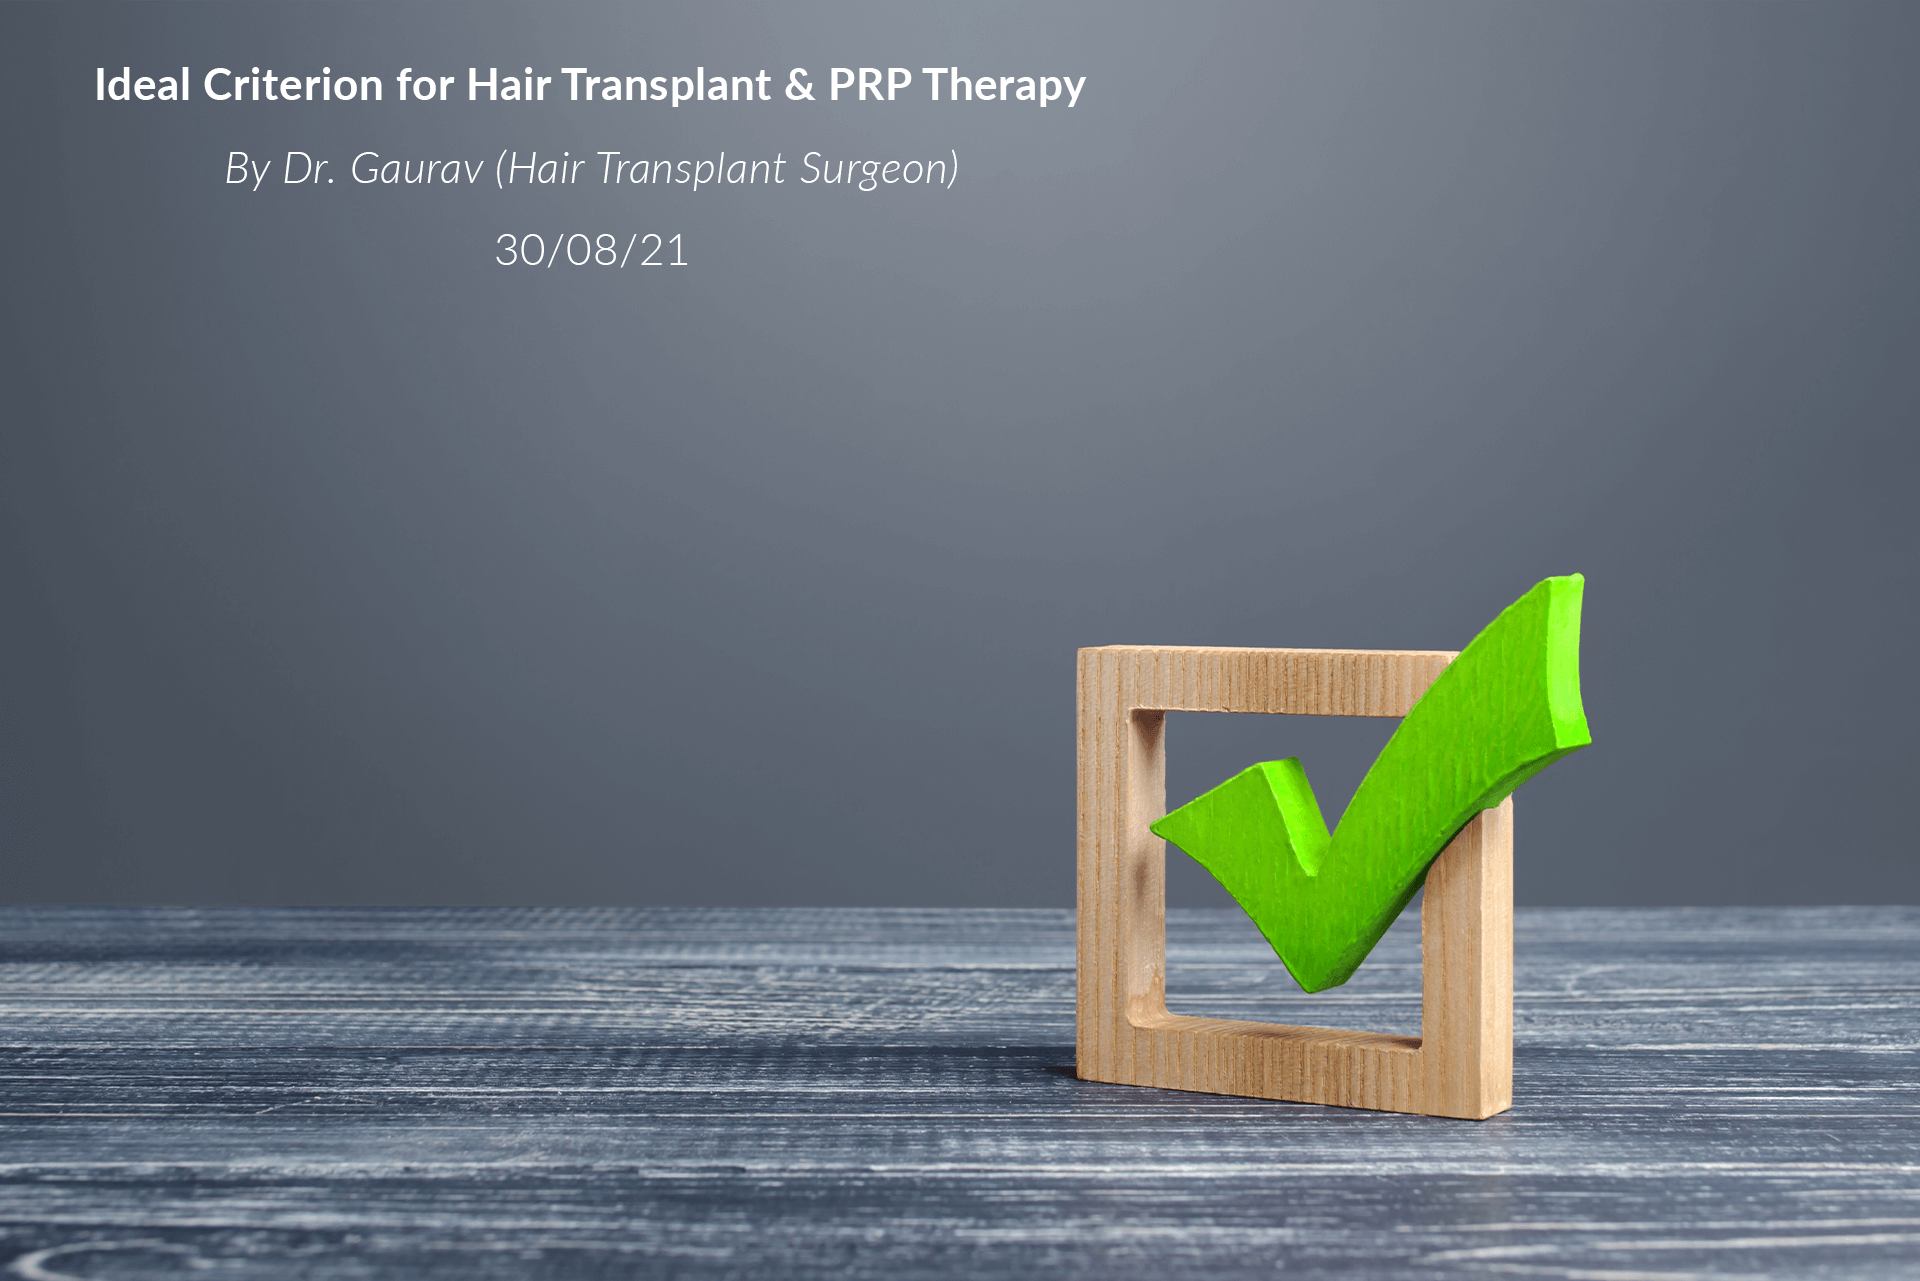 Ideal Criterion for Hair Transplant & PRP Therapy